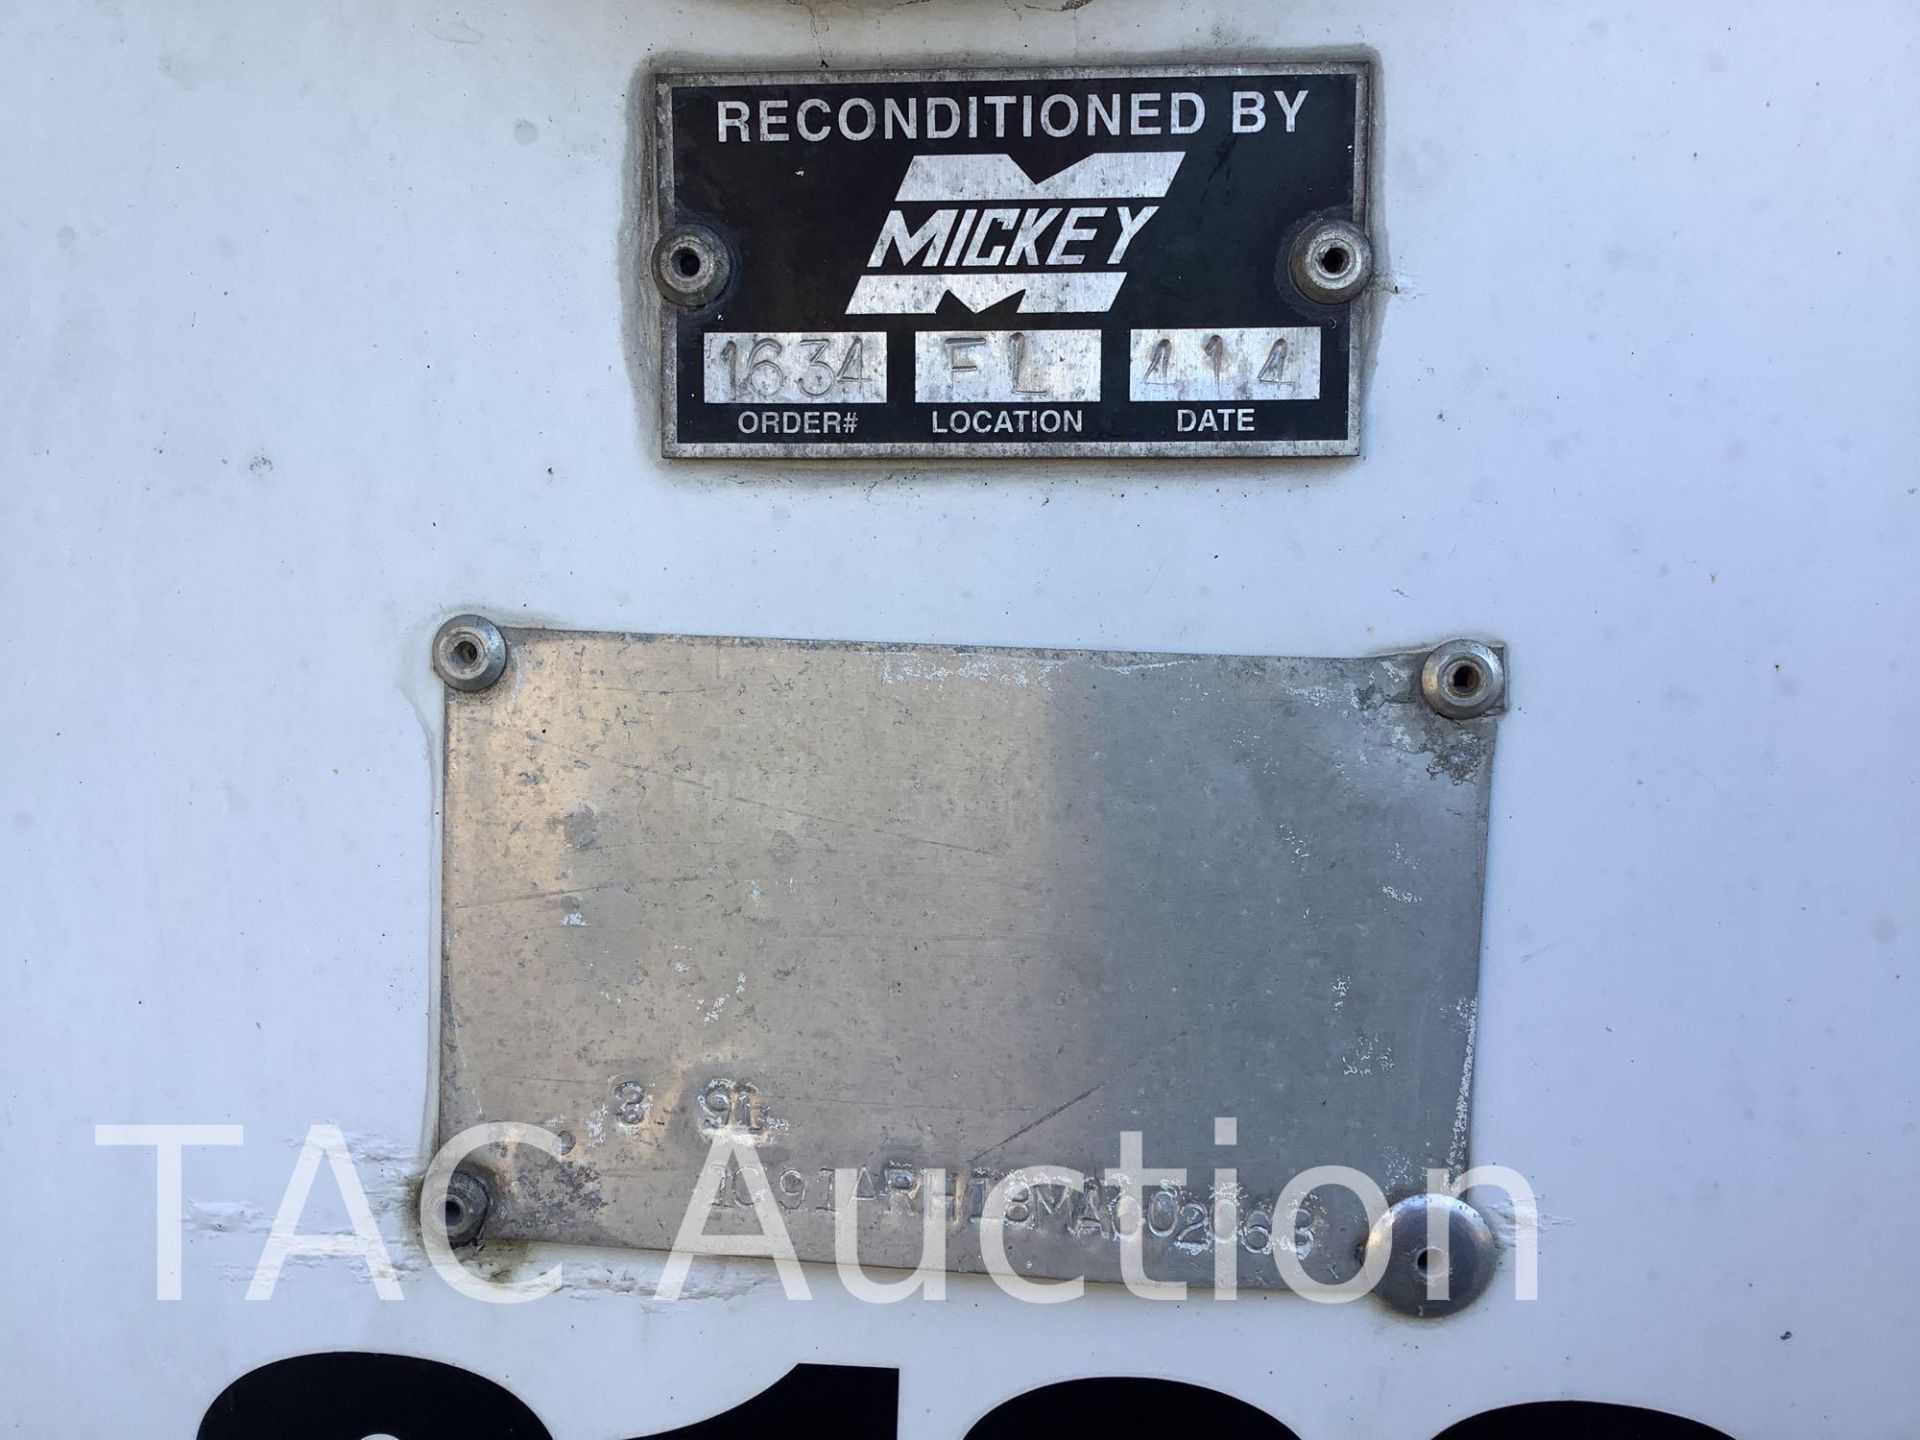 1991 Mickey 32ft Refrigerated Trailer - Image 28 of 28